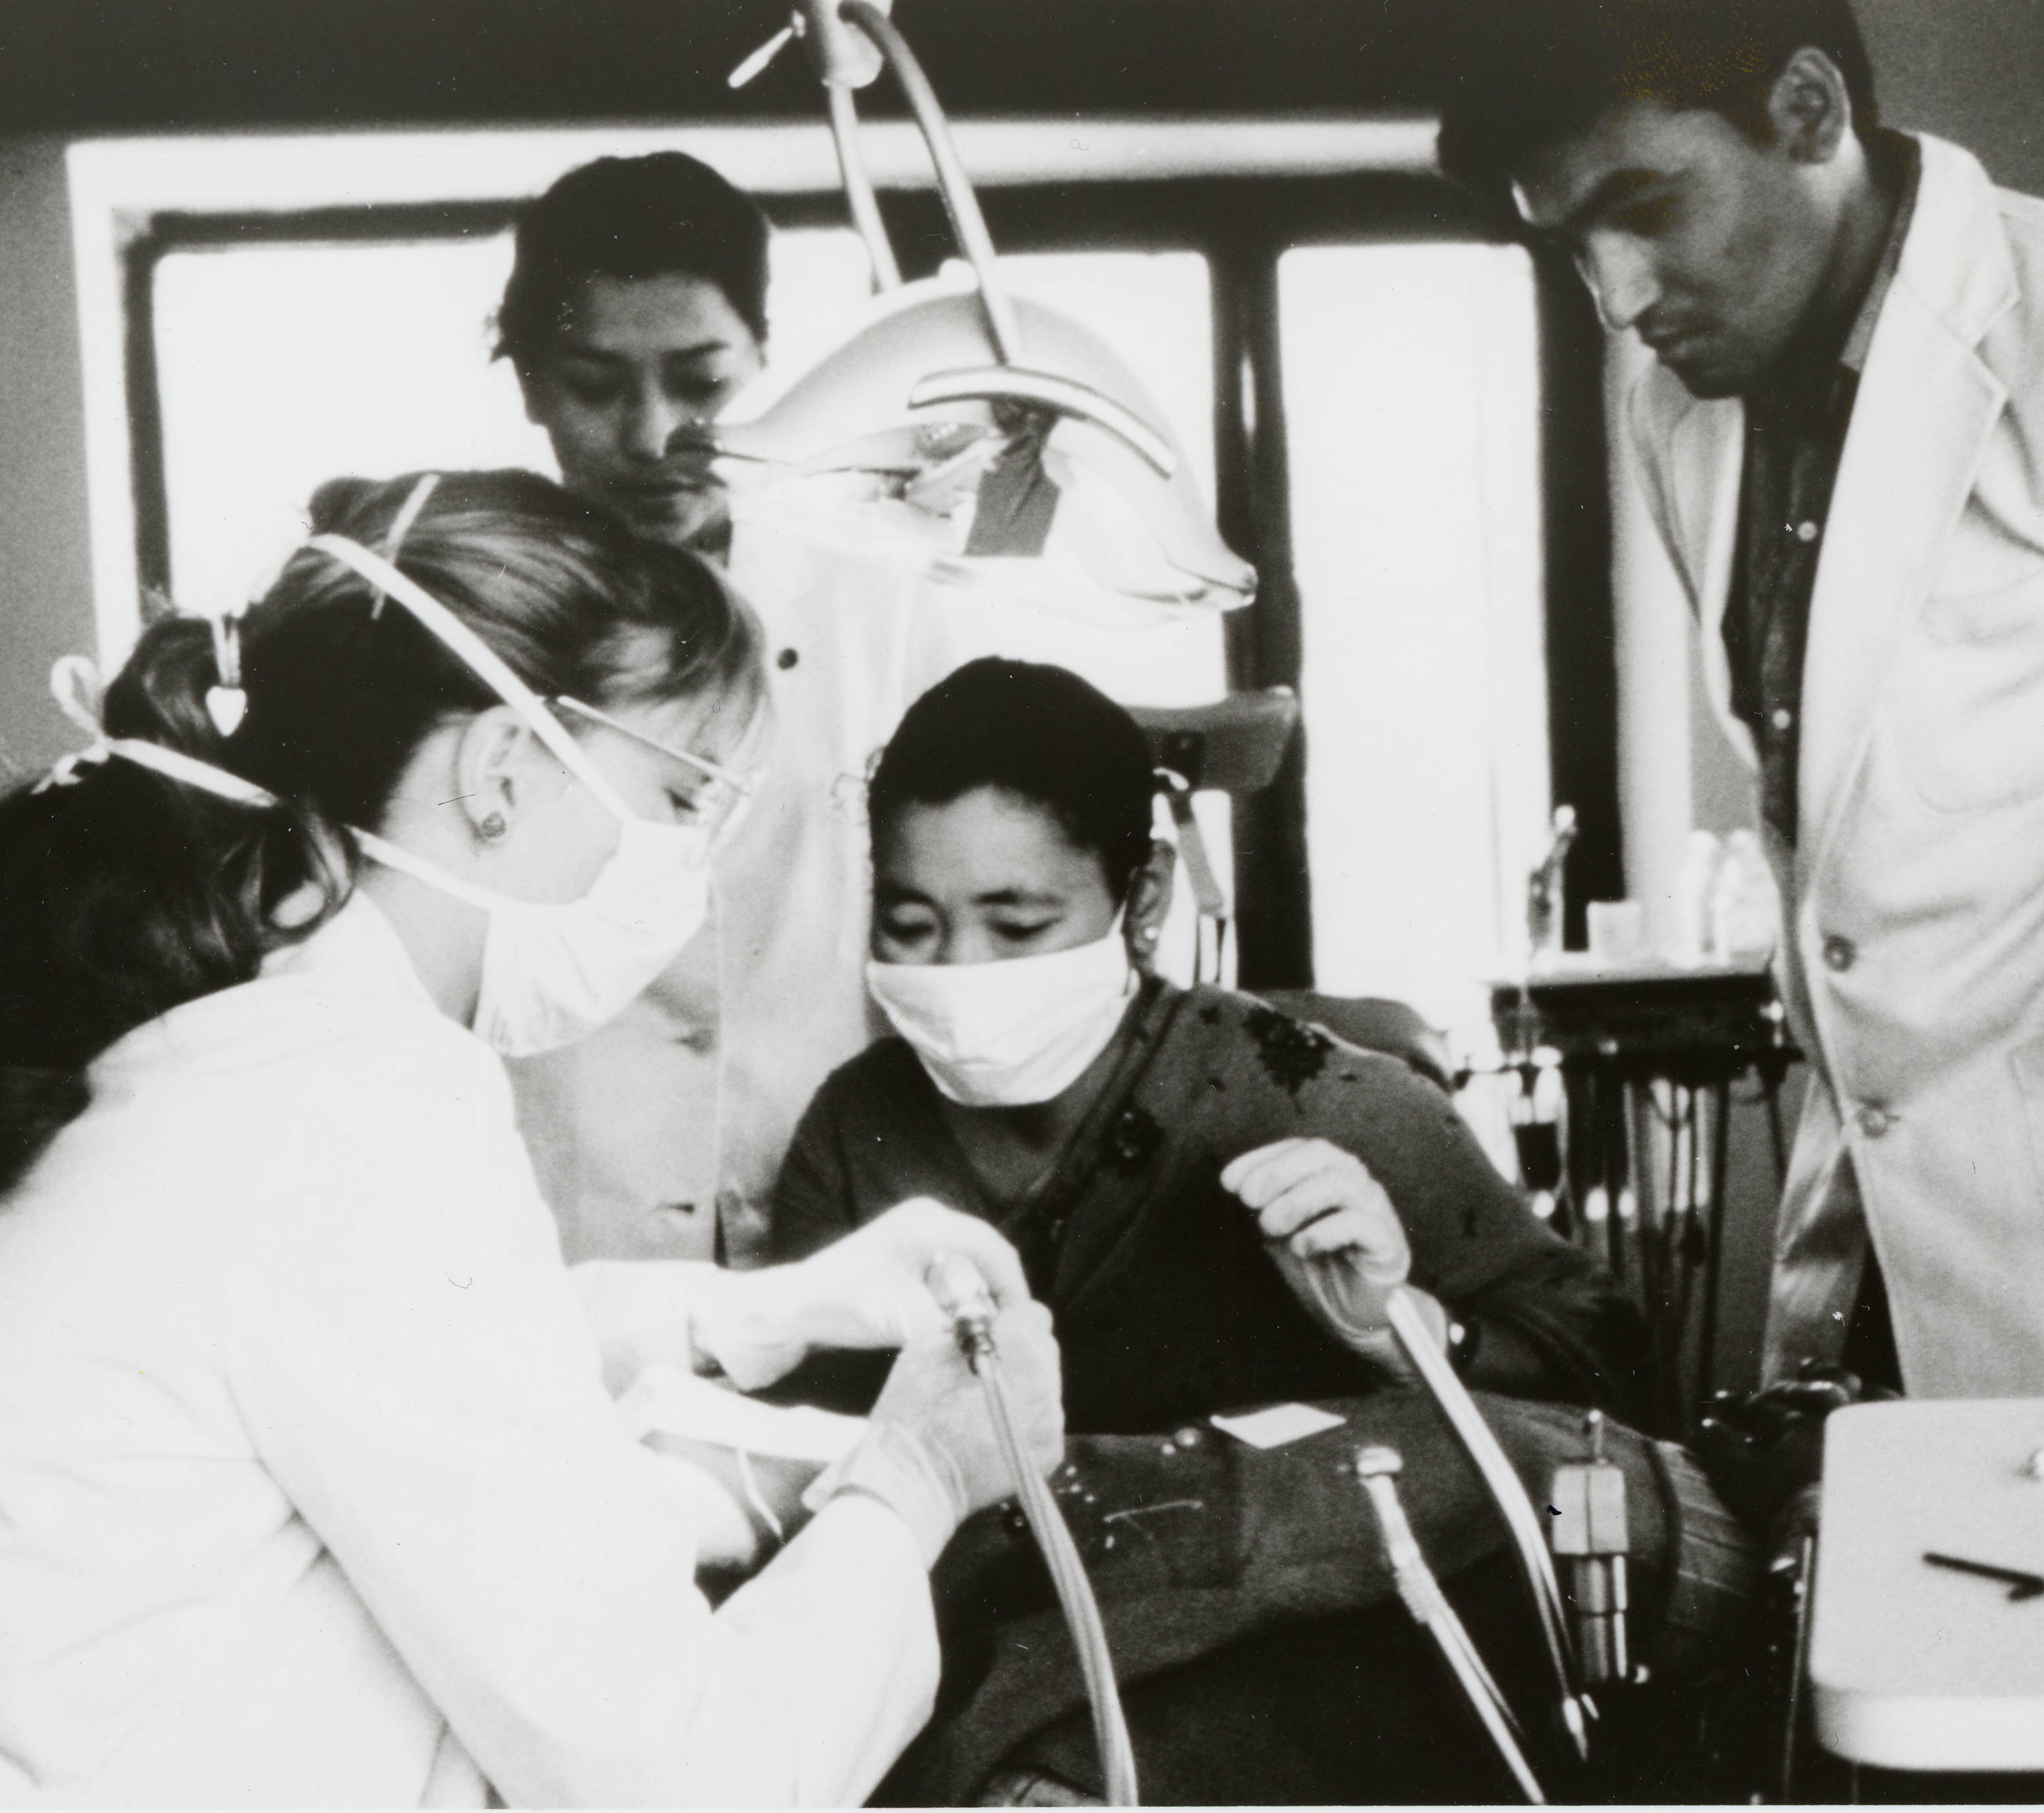 Dr. Toni Eigner-Barry instructs students, 1990. Historical Image Collection.